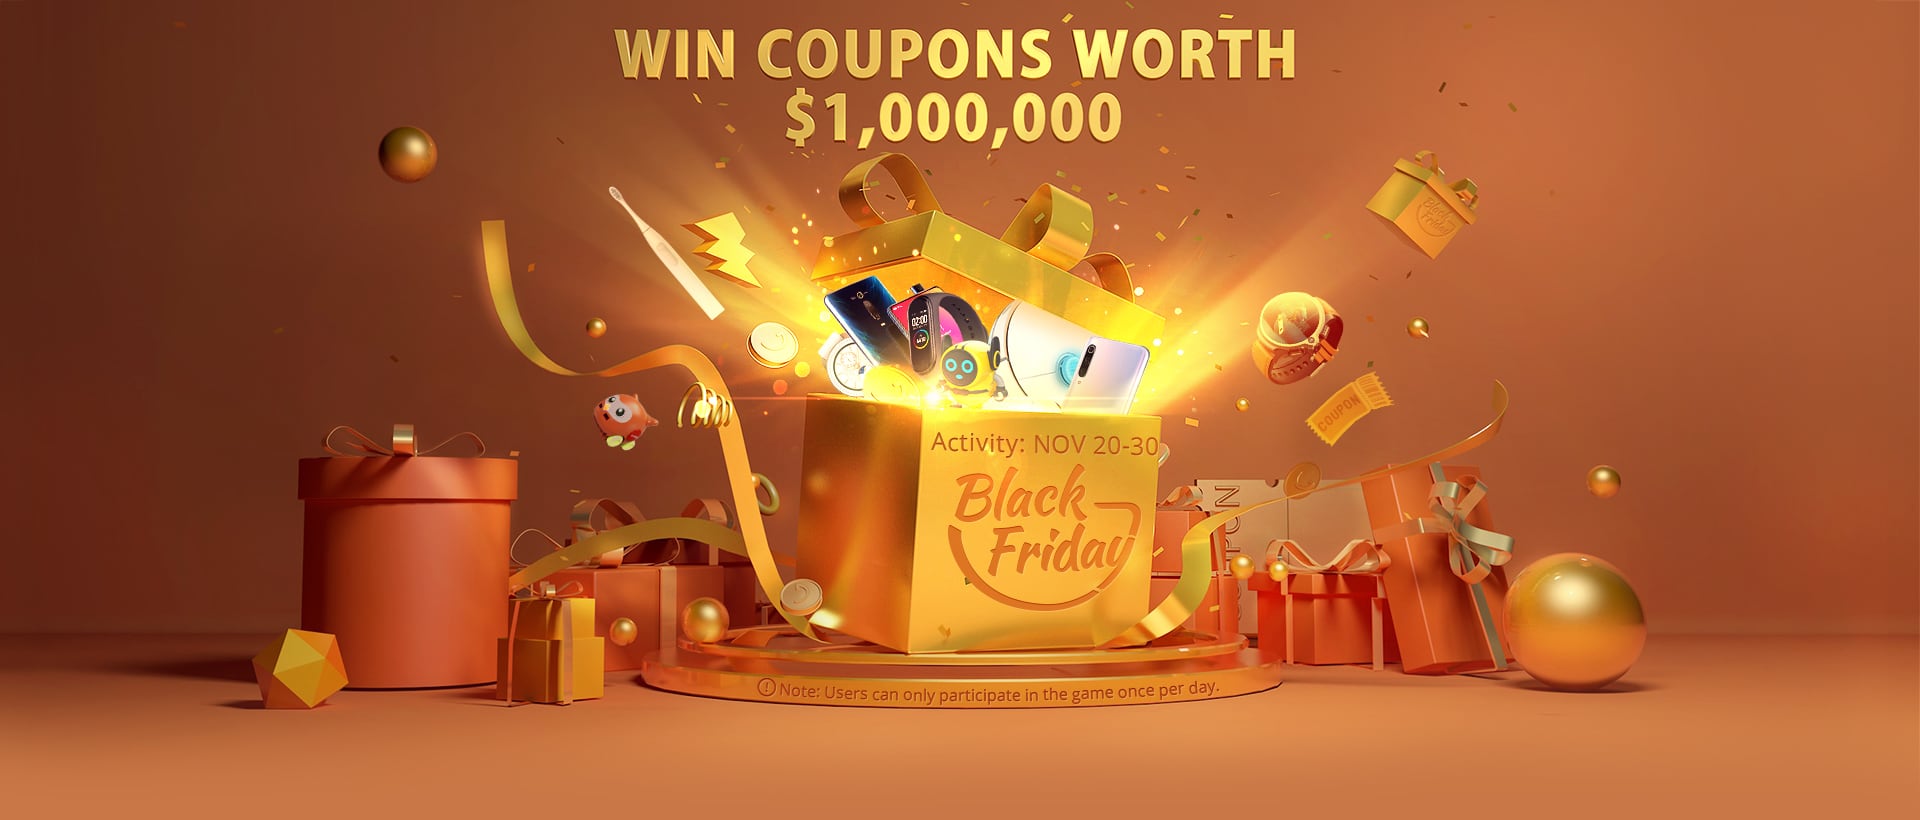 GearBest Black Friday 2019 - Coupon Rain - Win $1.000.000 of Coupons